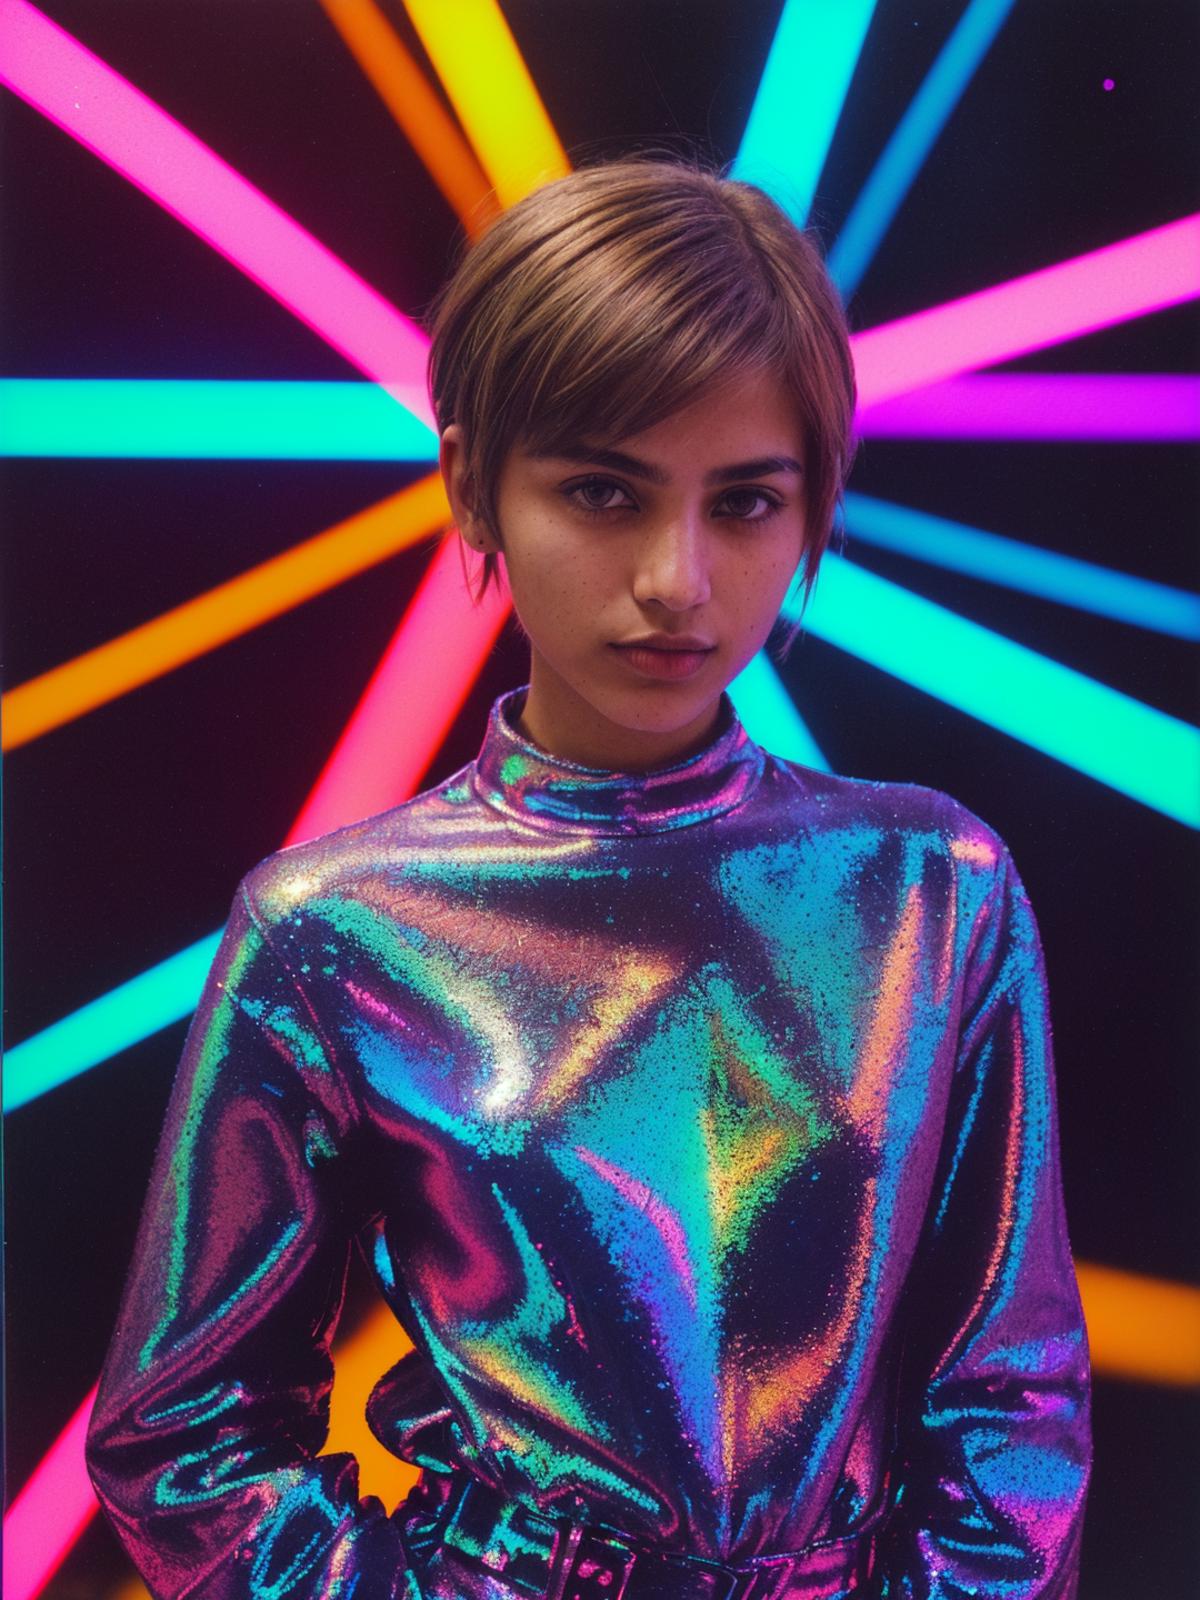 A woman wearing a shiny, metallic shirt stands in front of a colorful background.